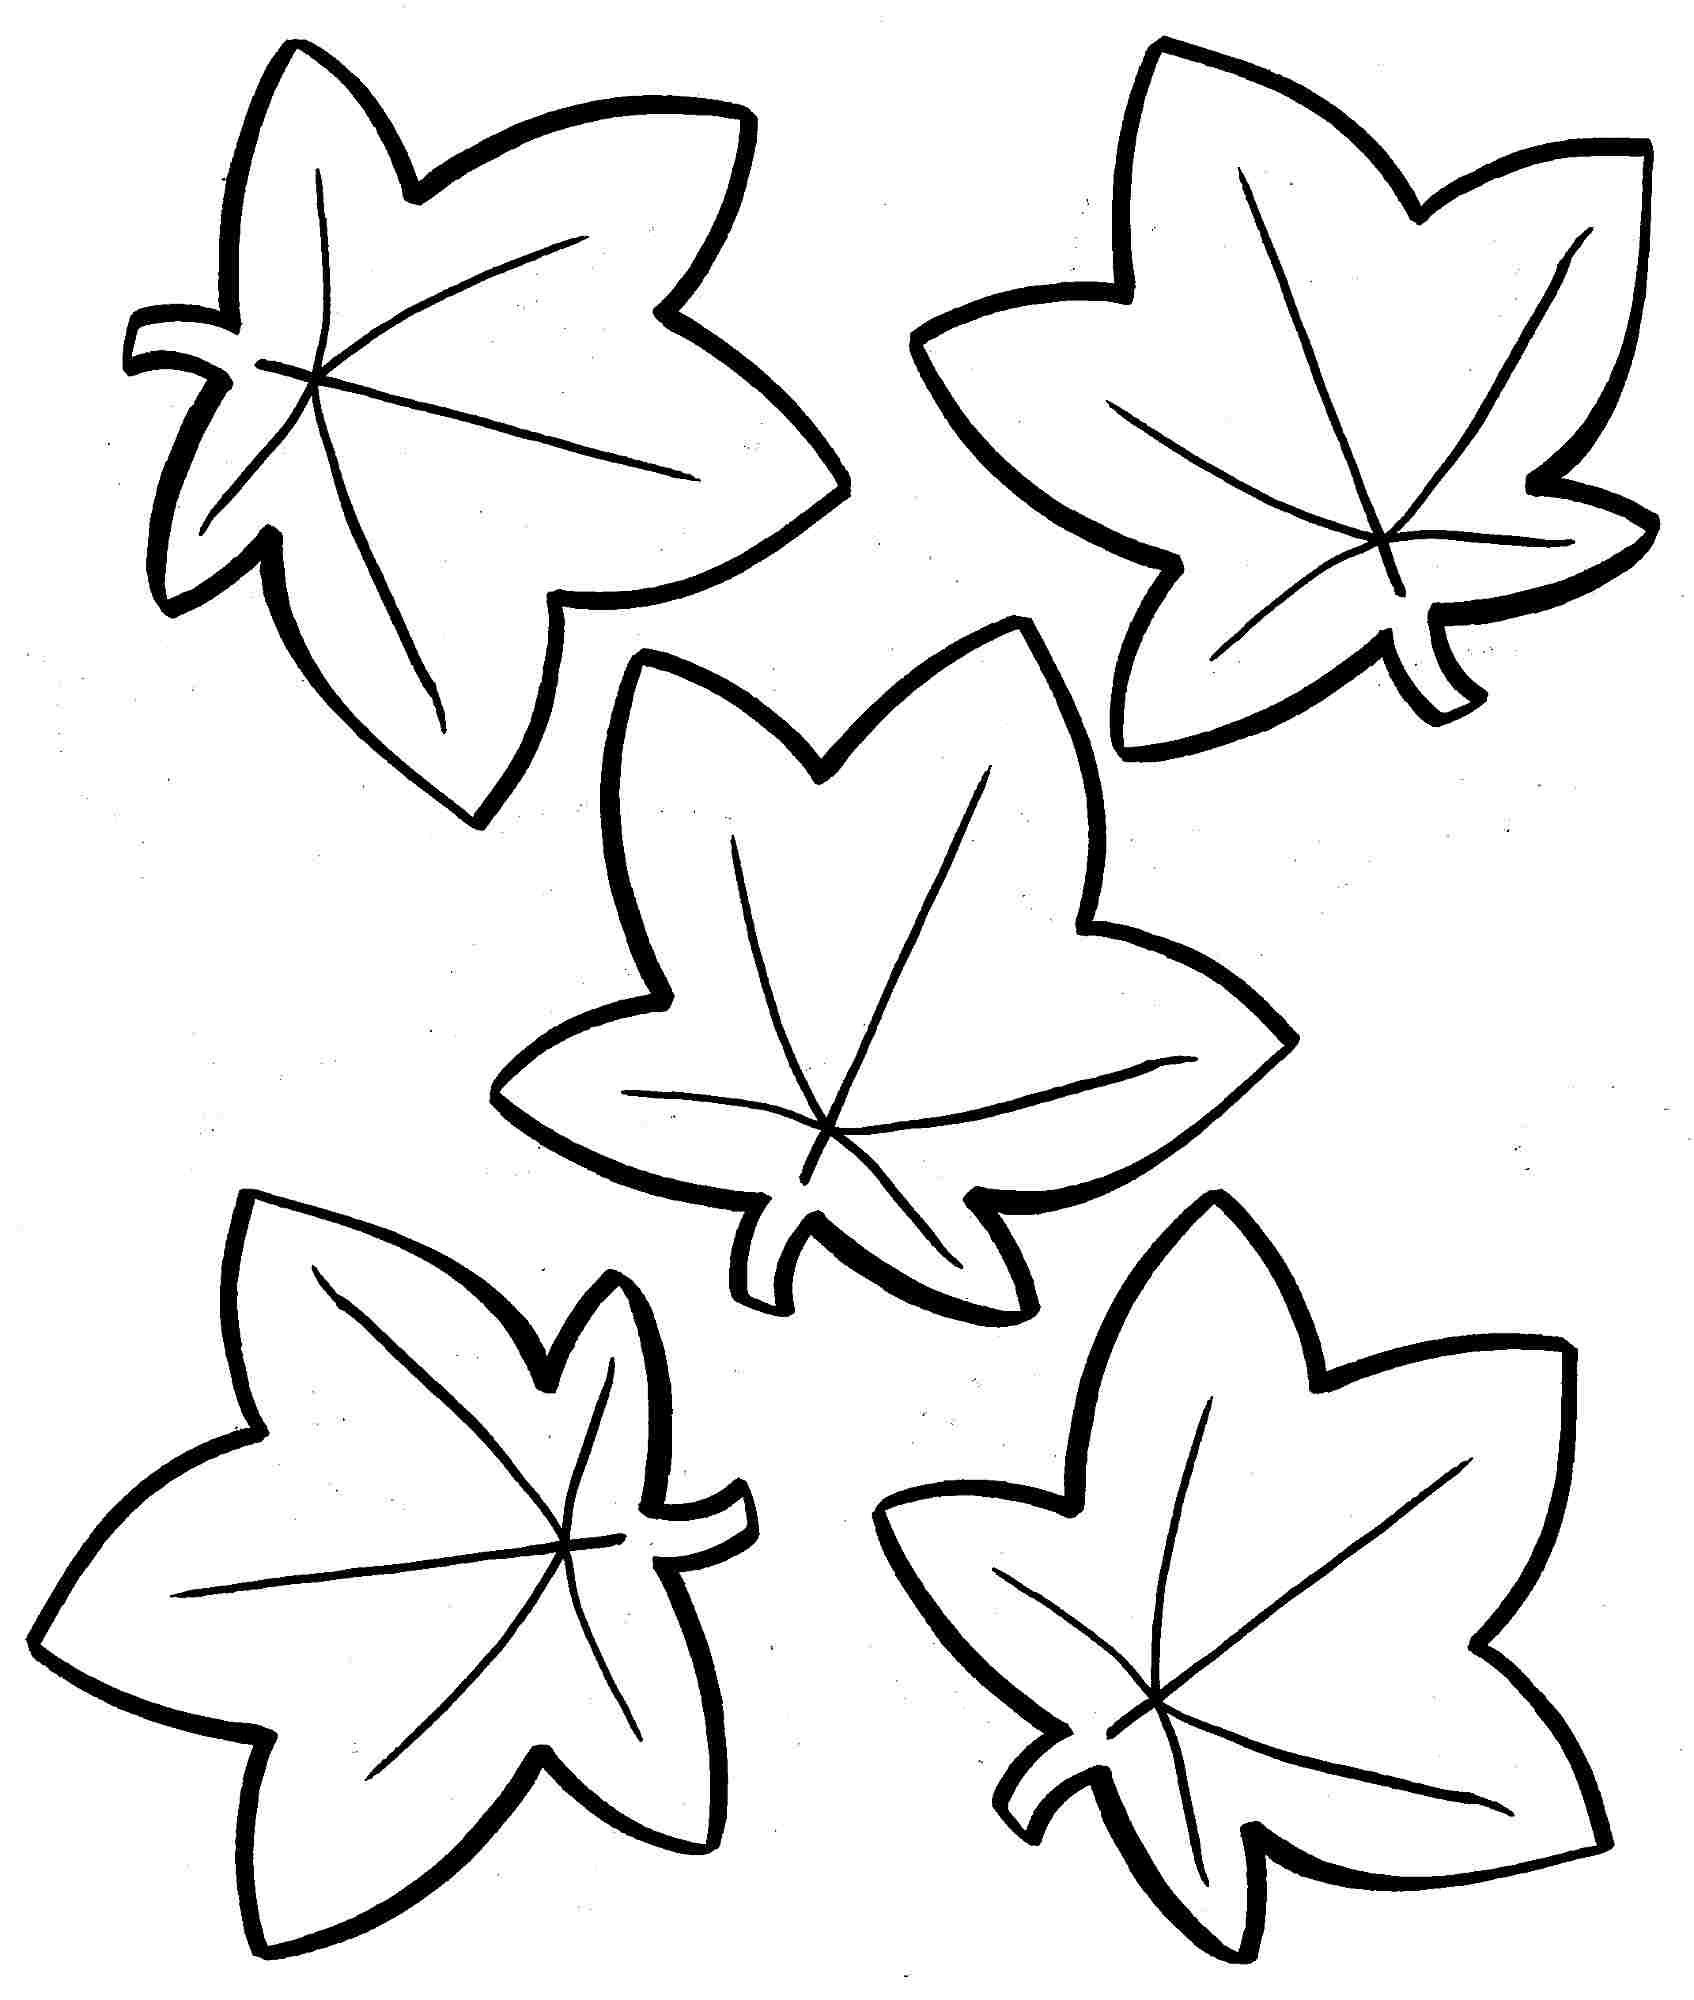 Coloring: Autumn Leaves Coloring Pages. - Free Printable Fall Leaves Coloring Pages